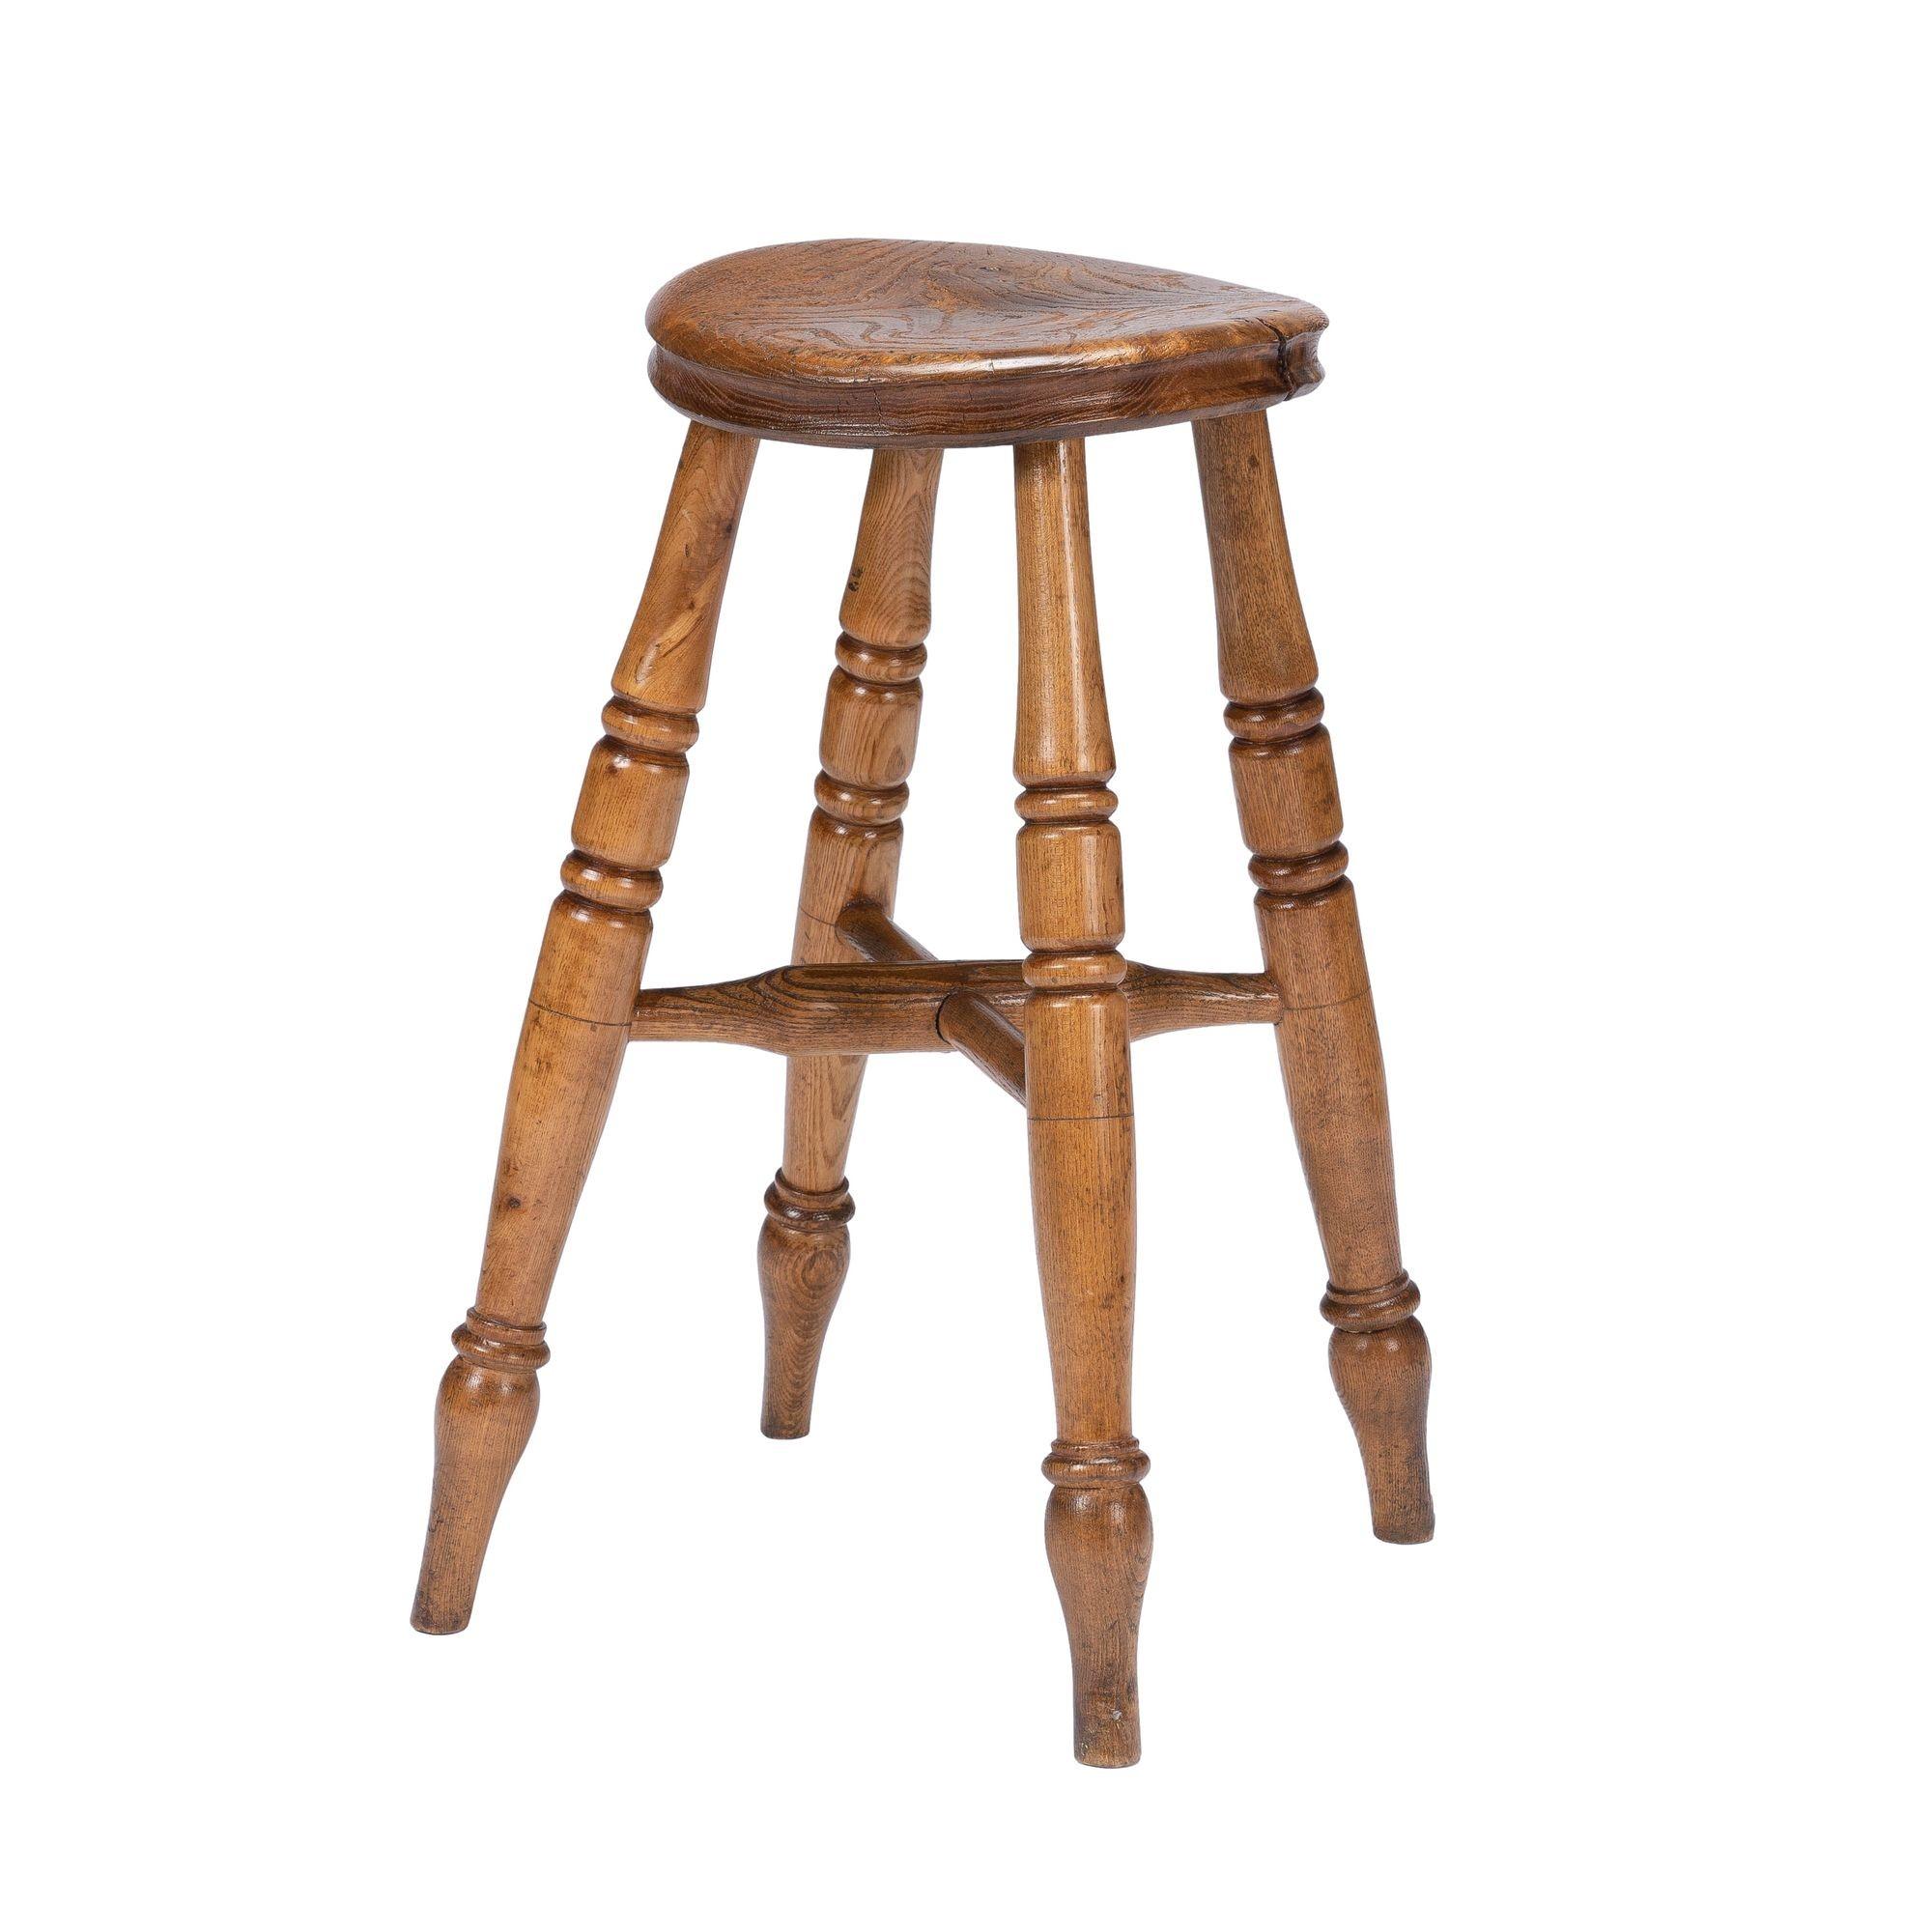 English Elm Wood Milking Stool '1860' In Good Condition For Sale In Kenilworth, IL